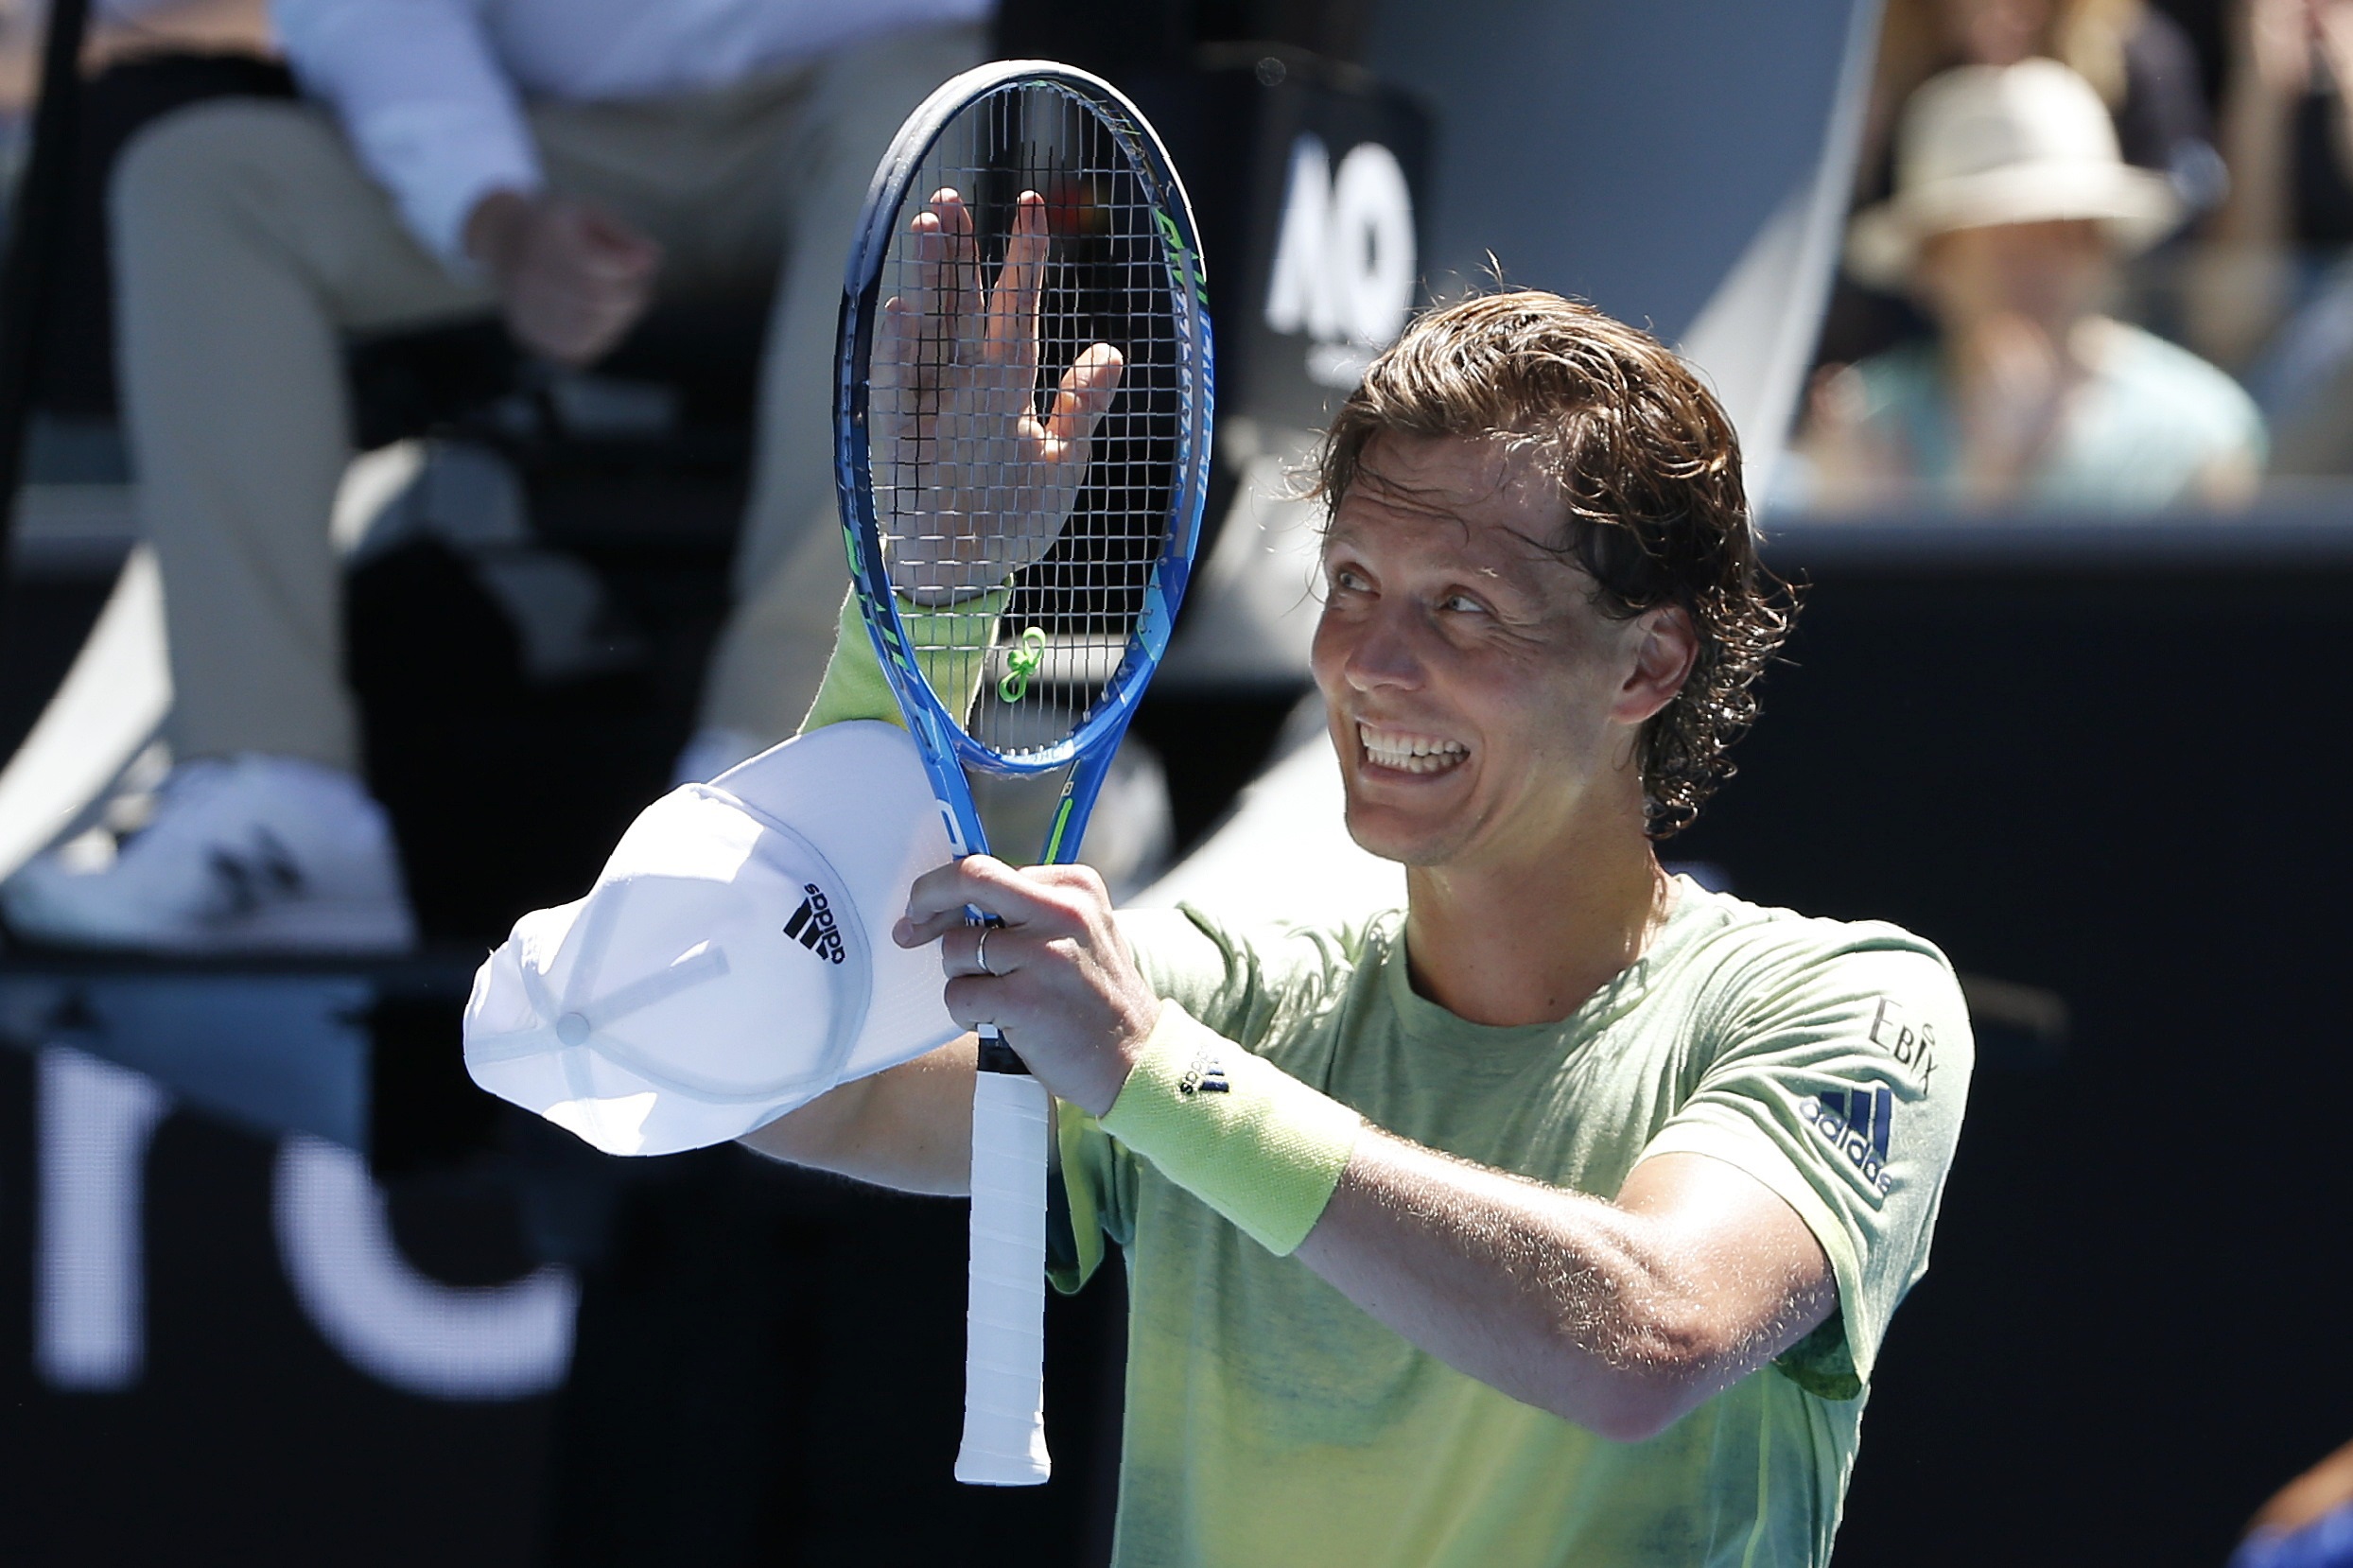 Tennis: Berdych sweeps past Fognini into quarterfinals